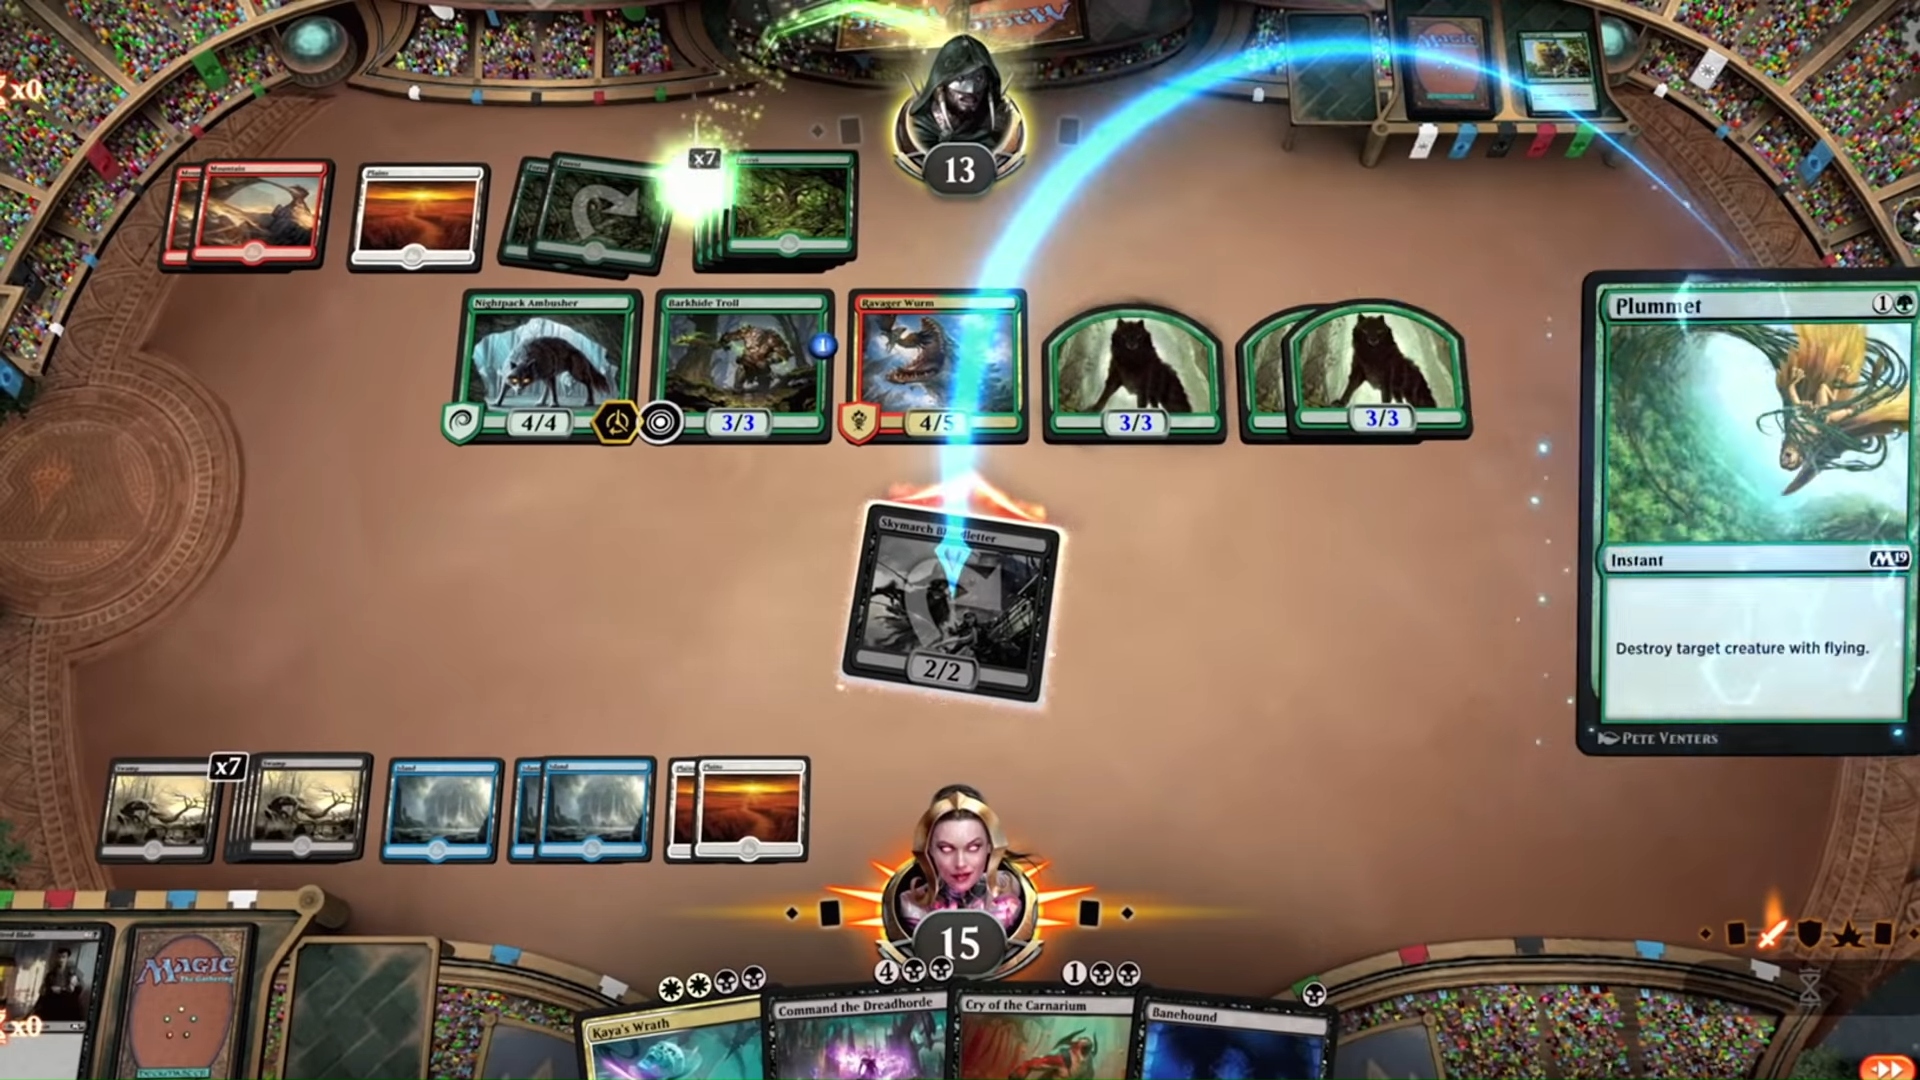 Best PC games for mobile devices: Magic: The Gathering Arena.  The screenshot shows a card game in combat with visual effects on the cards.